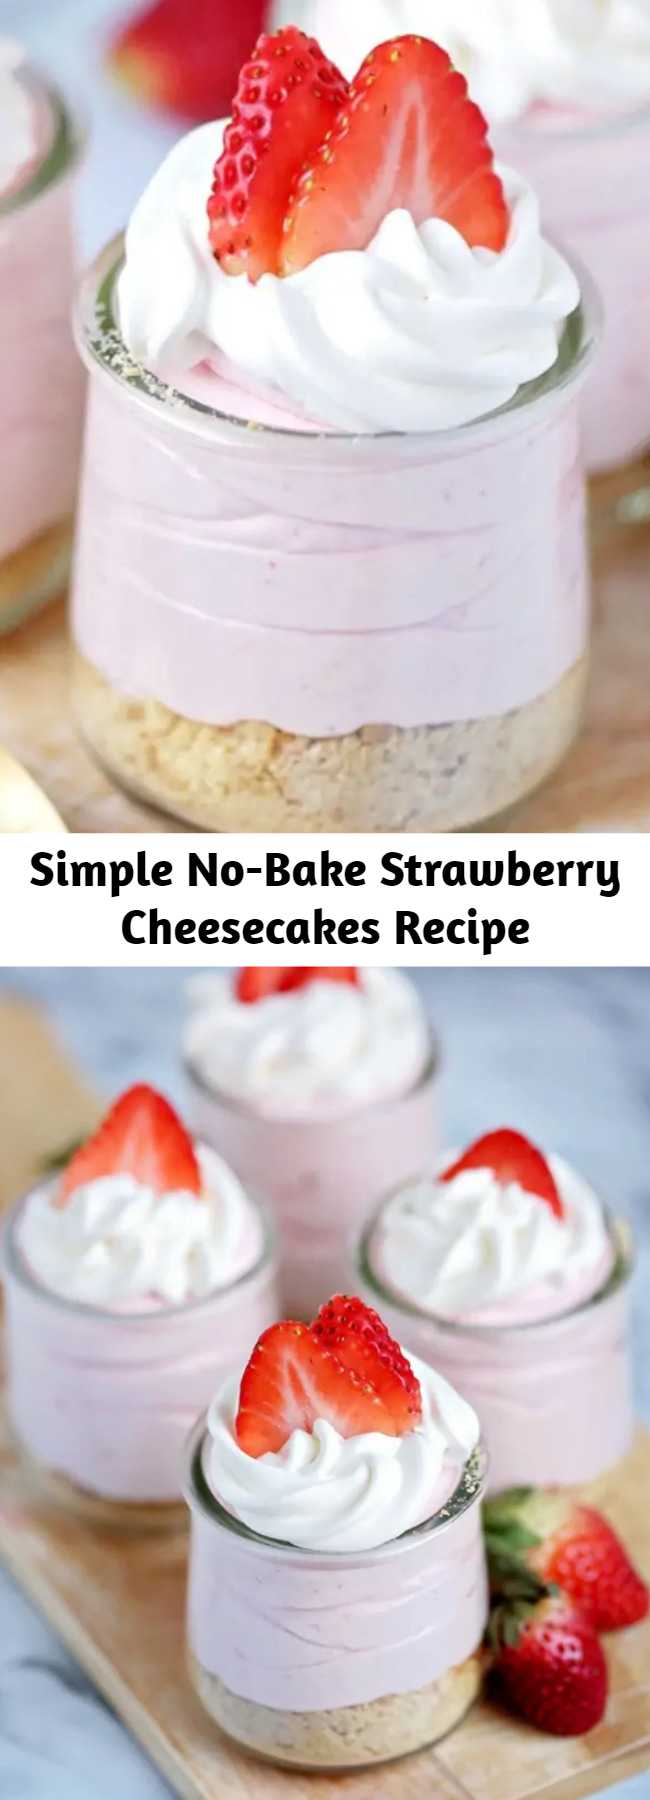 Simple No-Bake Strawberry Cheesecakes Recipe - A super simple recipe for No Bake Strawberry Cheesecakes using fresh or frozen strawberries. The perfect no-bake dessert for summer entertaining – or a fun recipe for the kids to help make!